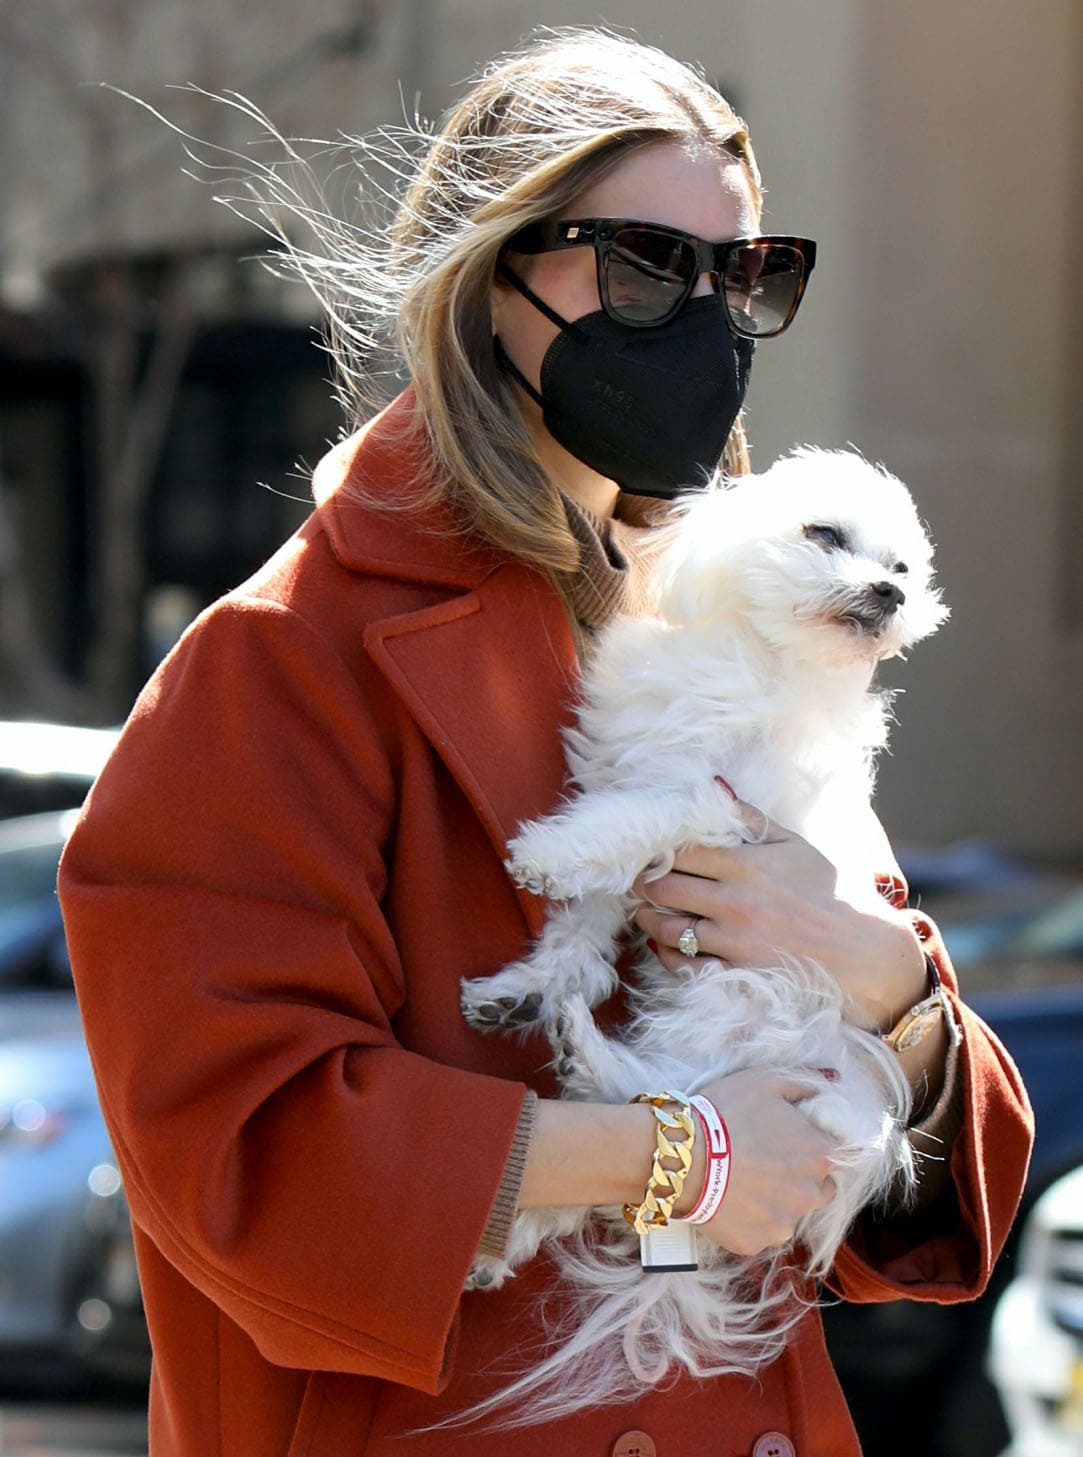 Olivia Palermo styles her look with Le Specs sunnies, black face mask, and chunky gold bracelet as she cradles Mr. Butler